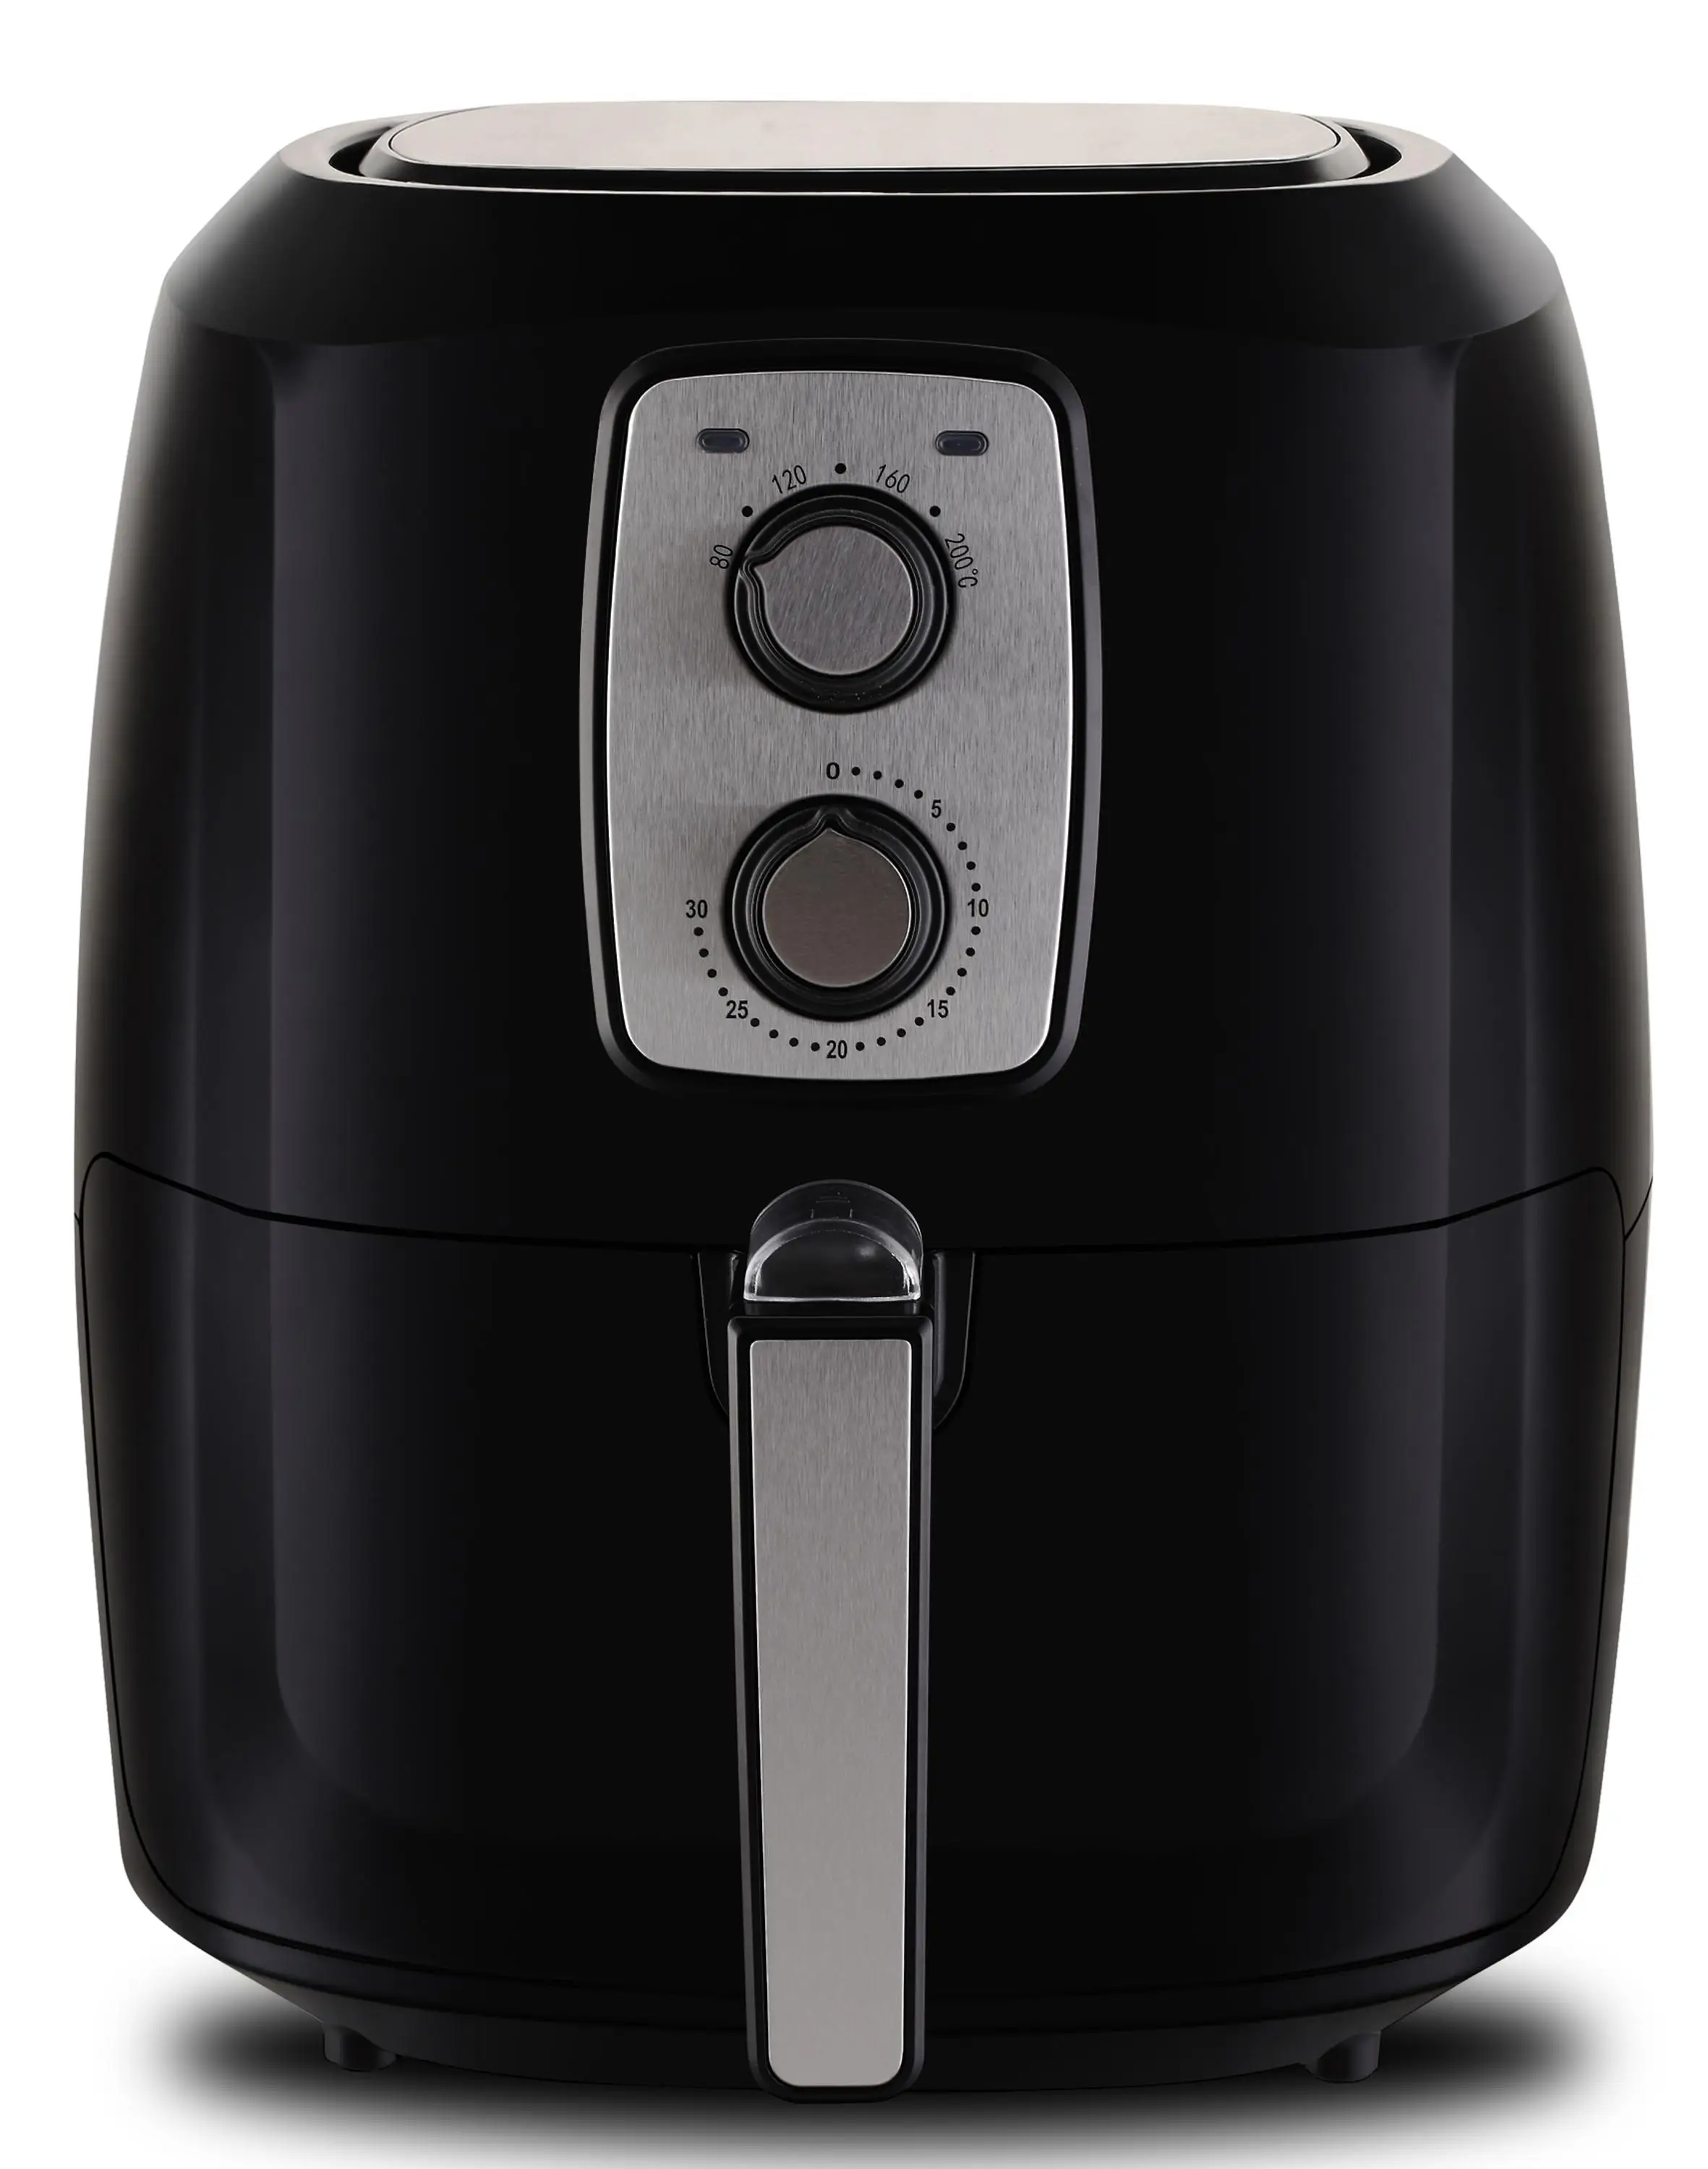 Sous Vide Machine - Air Fryer With No Oil - Buy Air Fryer With No Oil ...